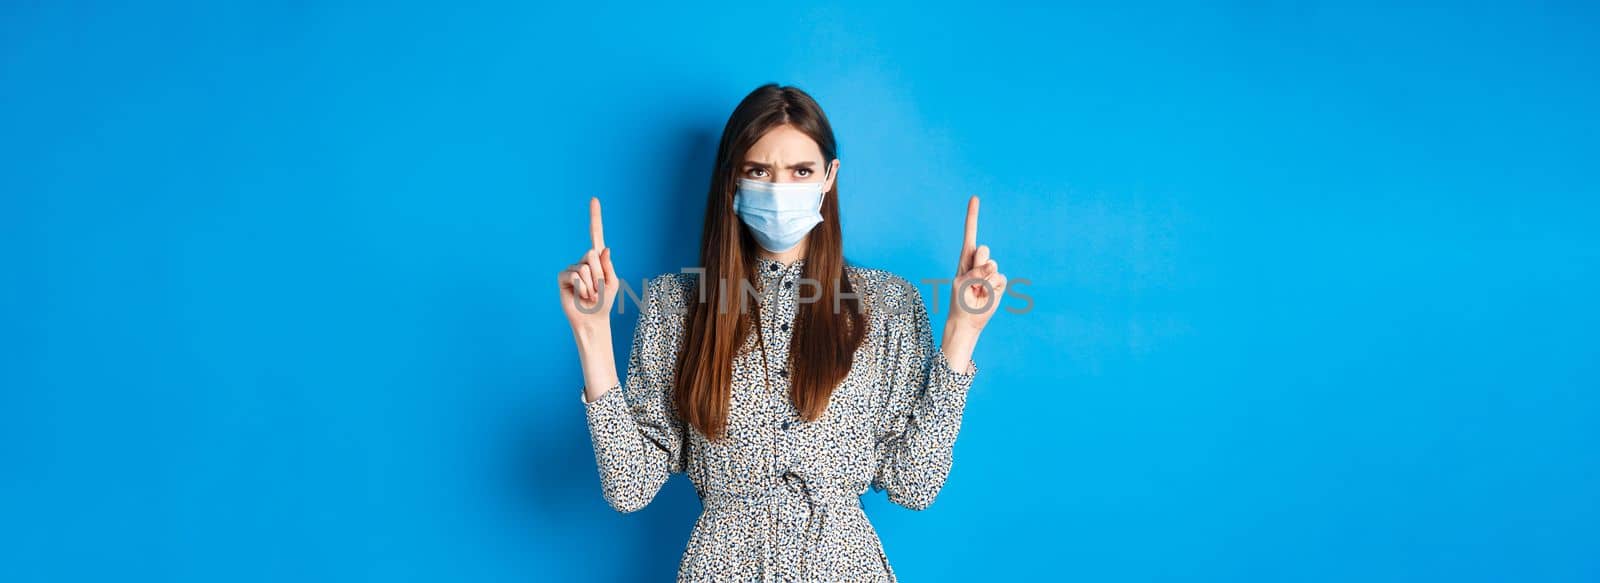 Covid-19, social distancing and healthcare concept. Angry woman frowning in medical mask, pointing and looking up with condemn and disappointment, blue background.